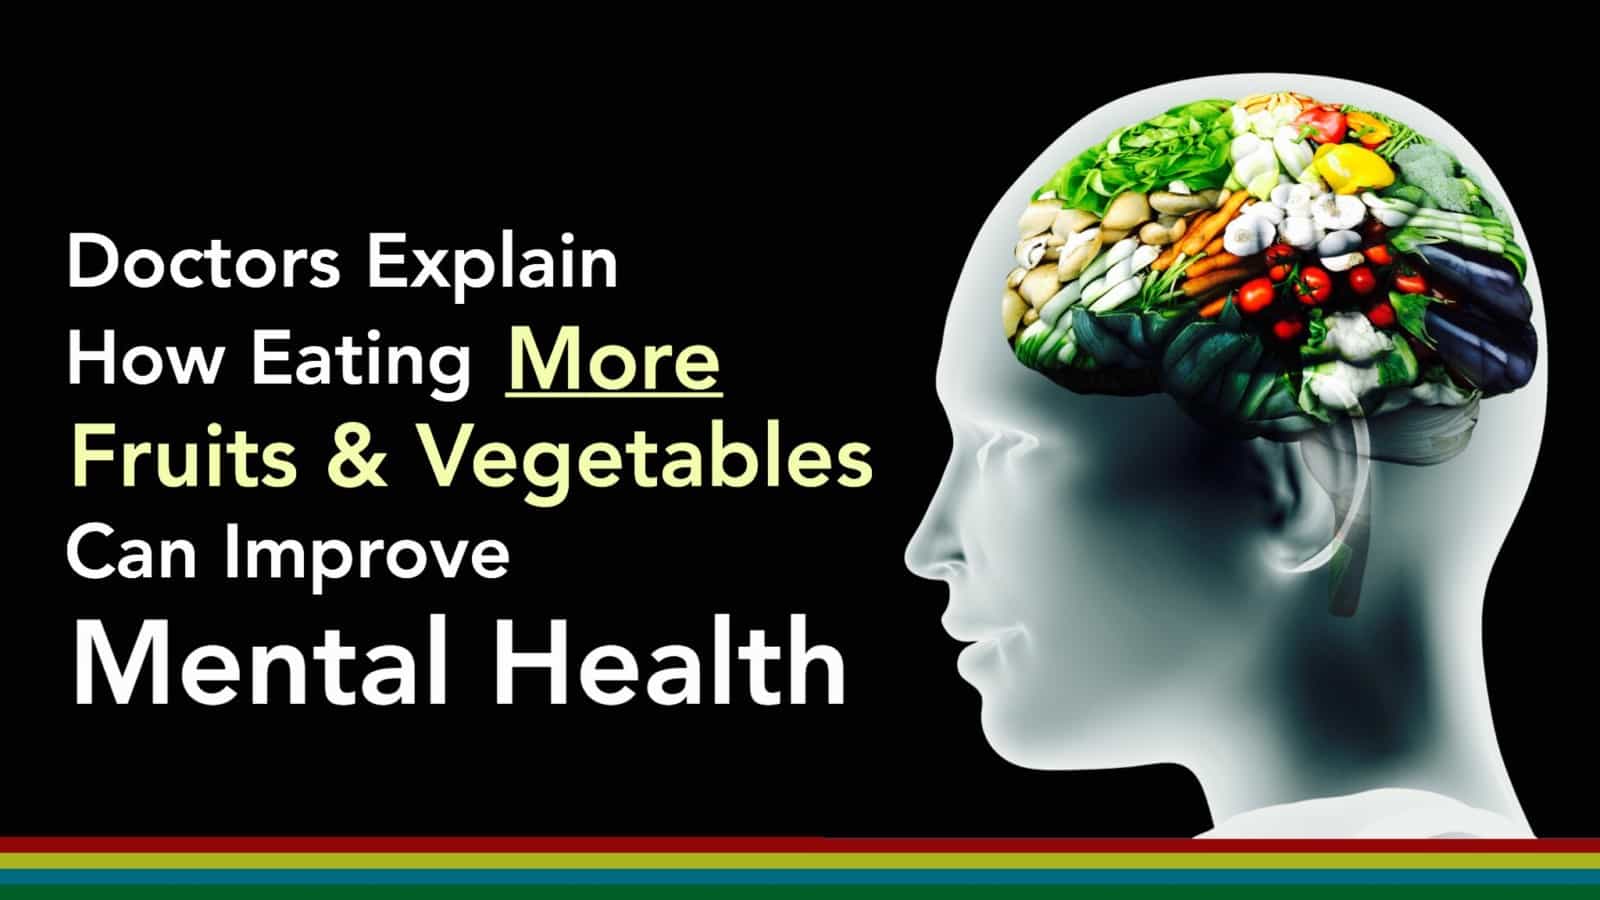 Doctors Explain How Eating More Fruits And Vegetables Can Improve Mental Health